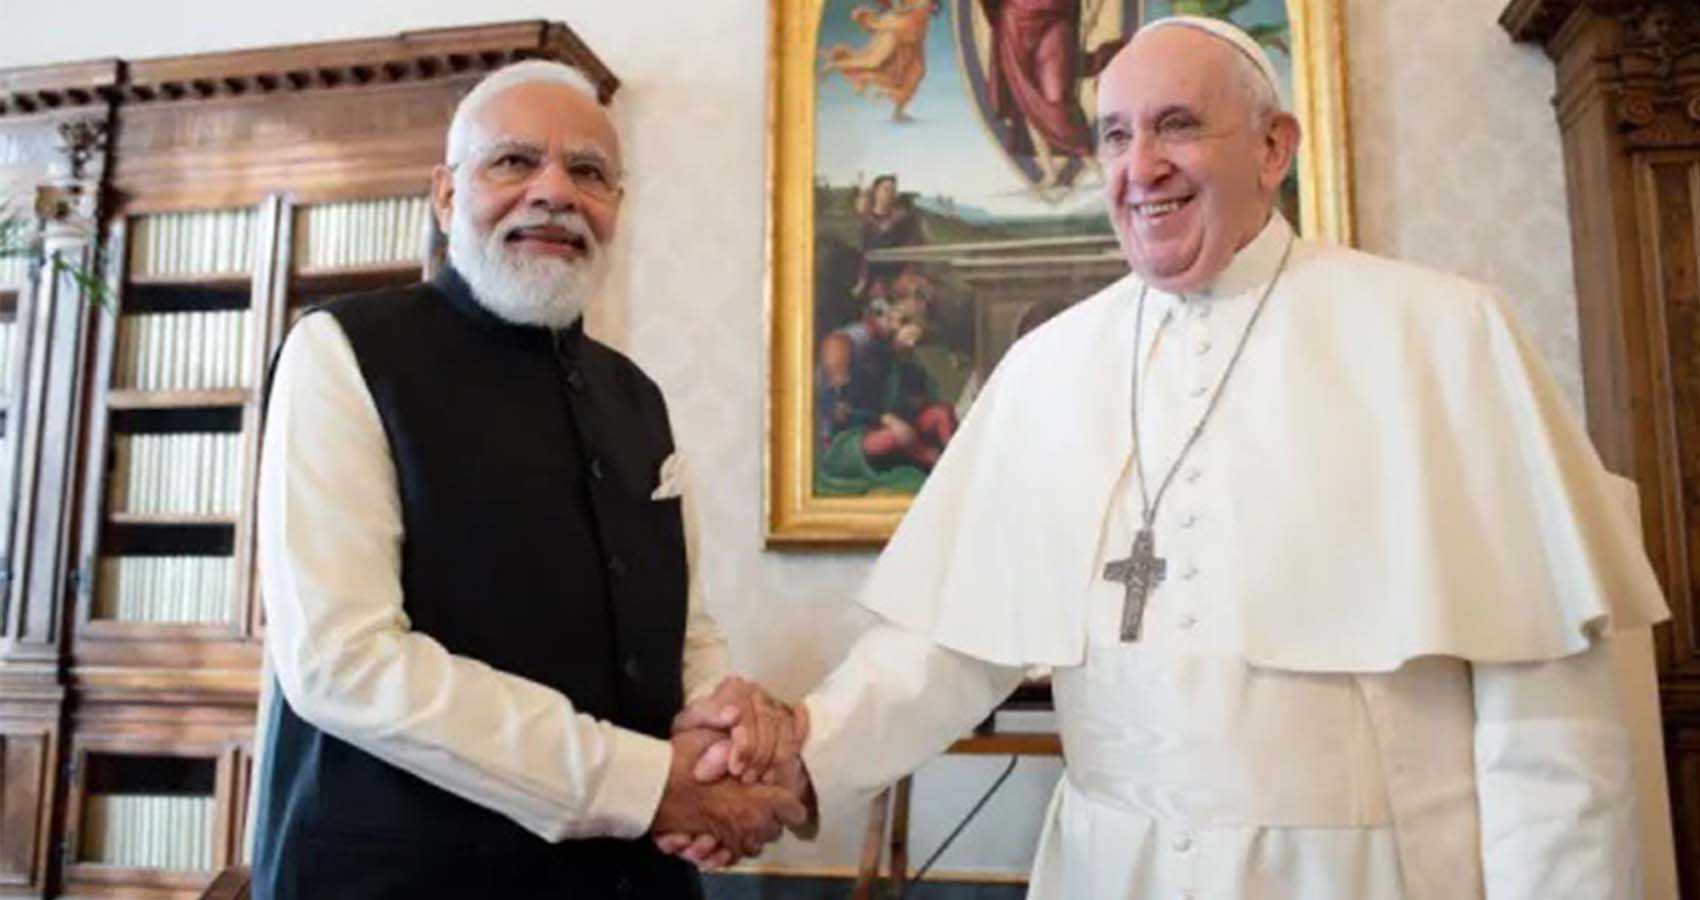 Narendra Modi Invites Pope Francis To Visit India During Meeting With Pope At The Vatican